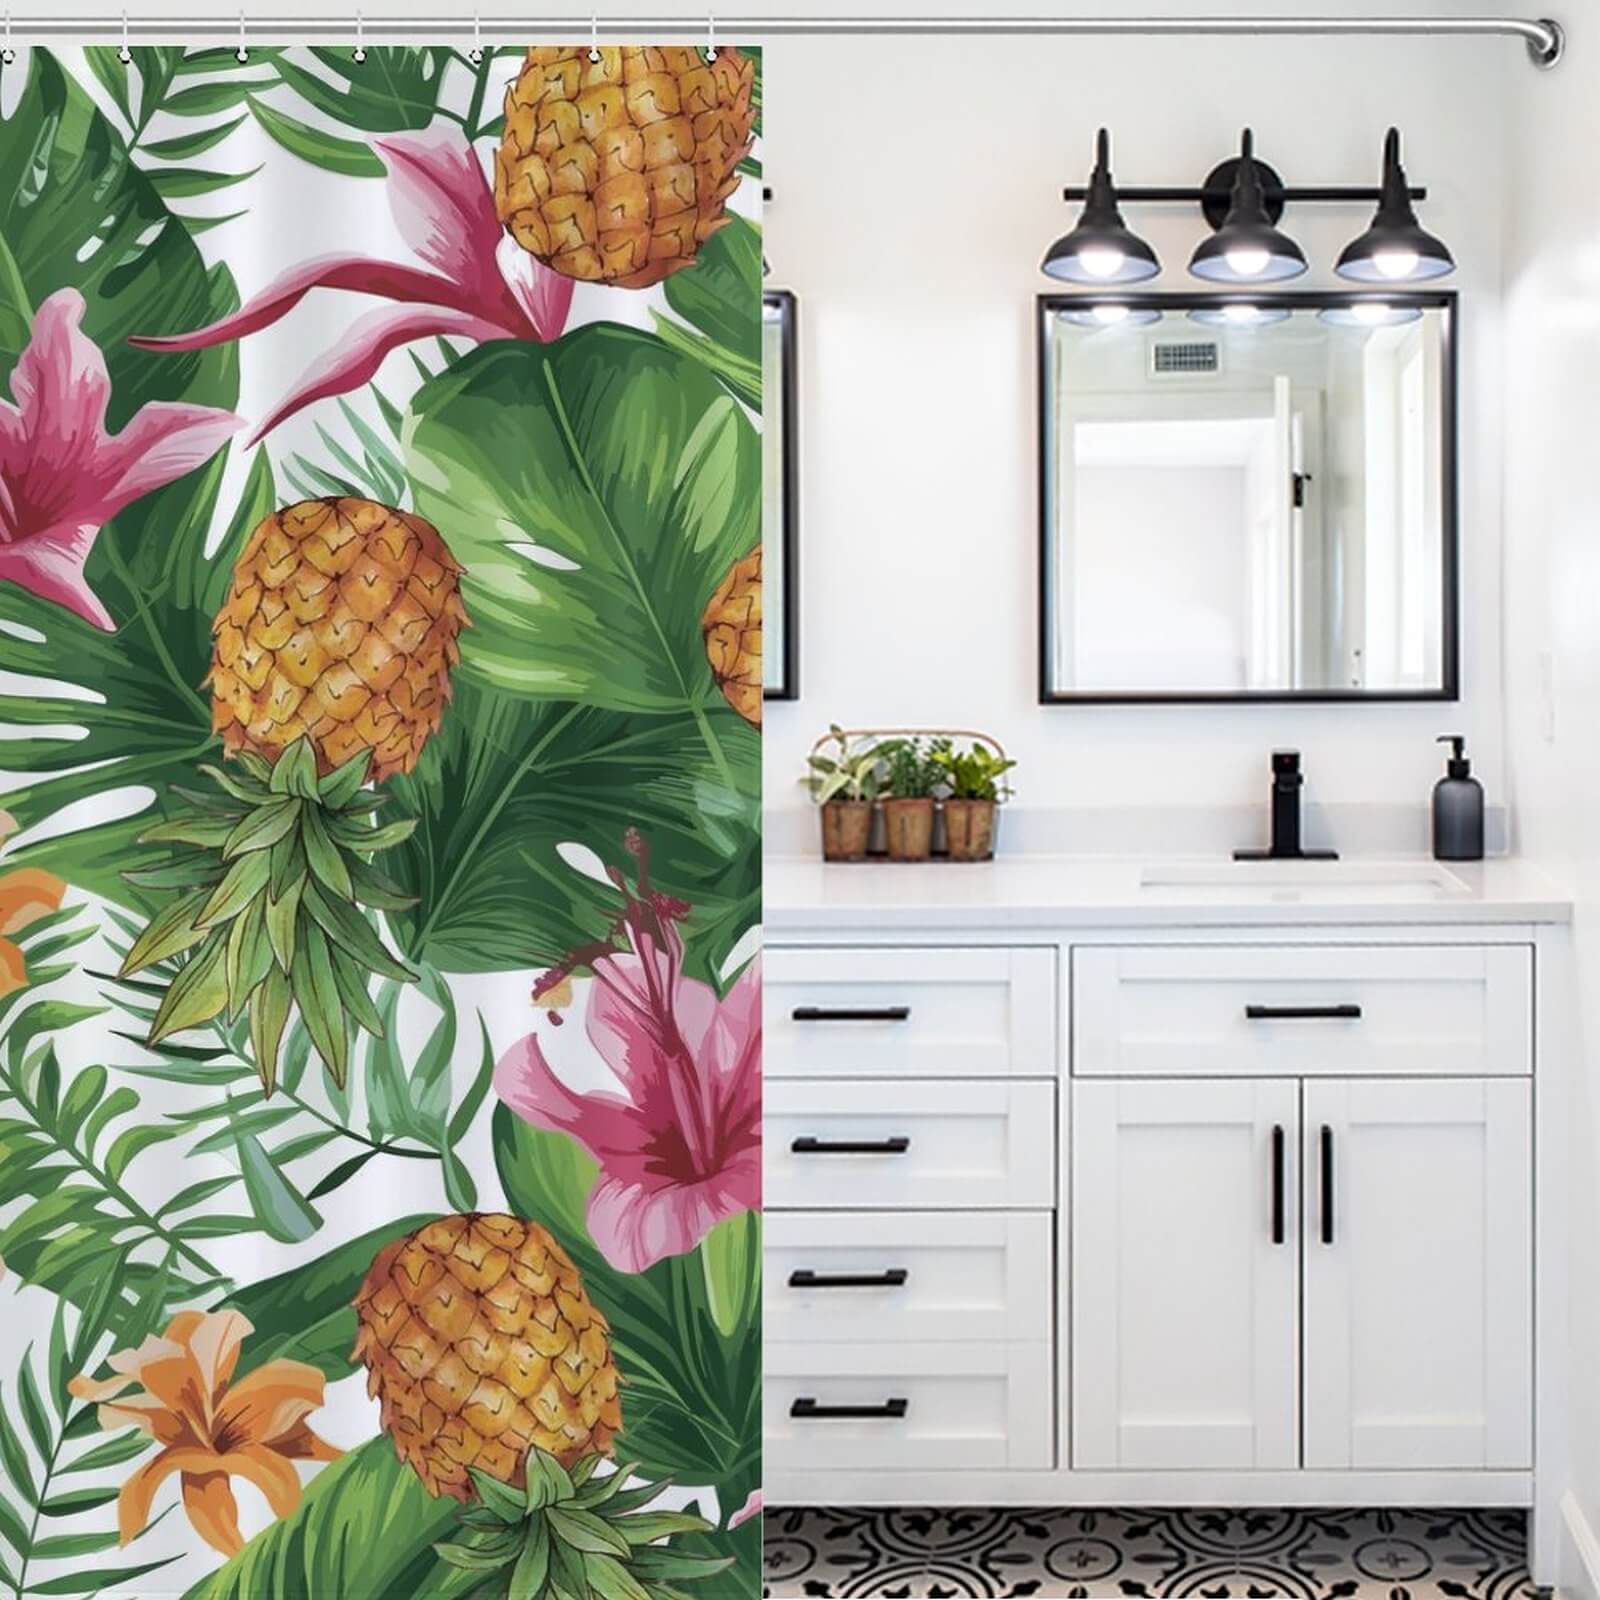 Transform your bathroom into a tropical oasis with the Tropical Pineapple Shower Curtain-Cottoncat by Cotton Cat featuring vibrant hibiscus prints. Perfect for adding a touch of exotic flair to your bathroom decor.